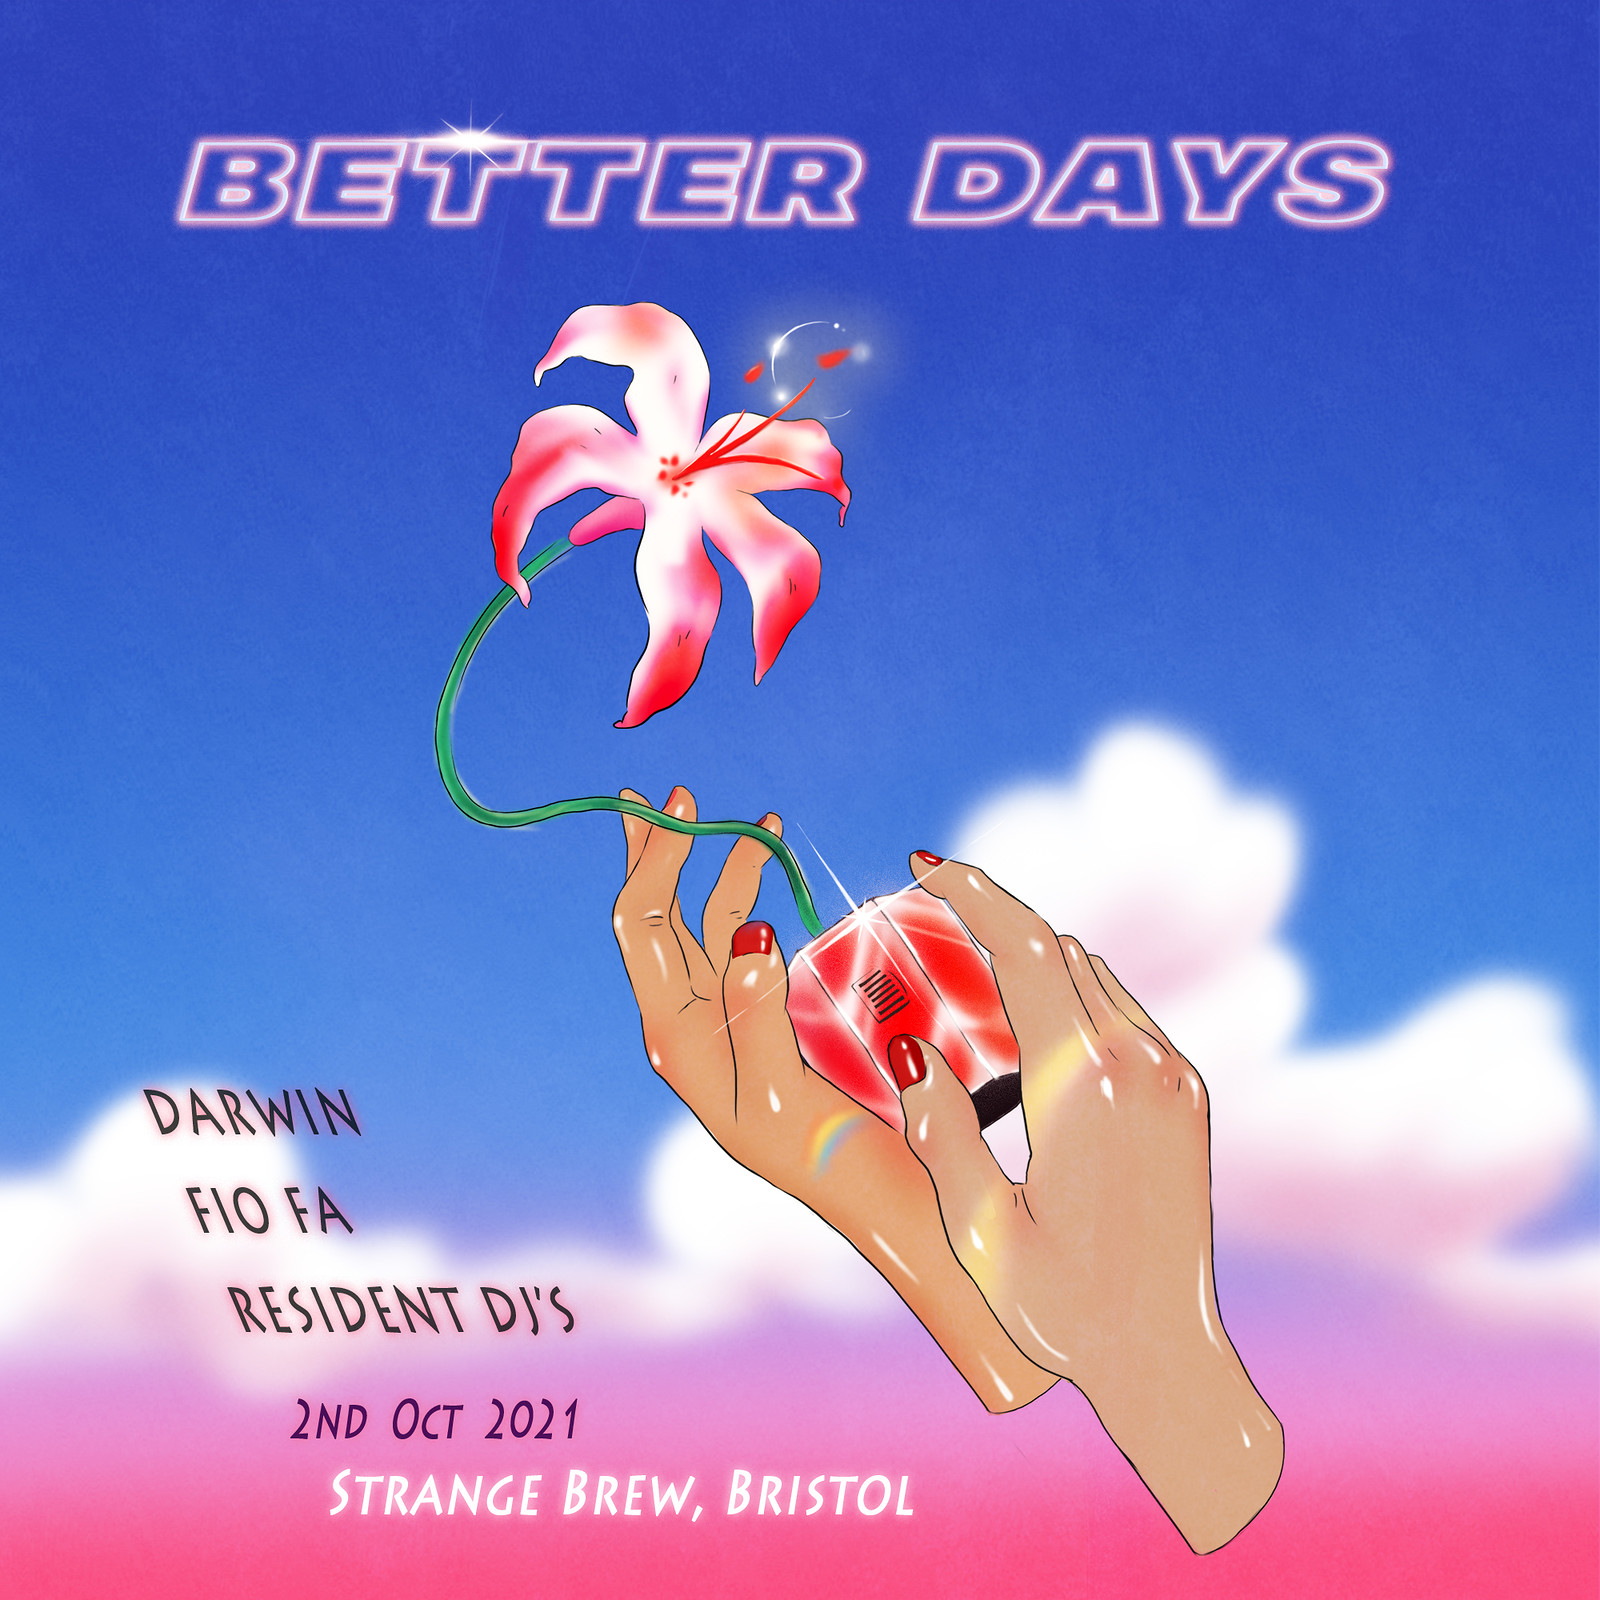 Better Days with Darwin, Fio Fa and Resident DJ's at Strange Brew